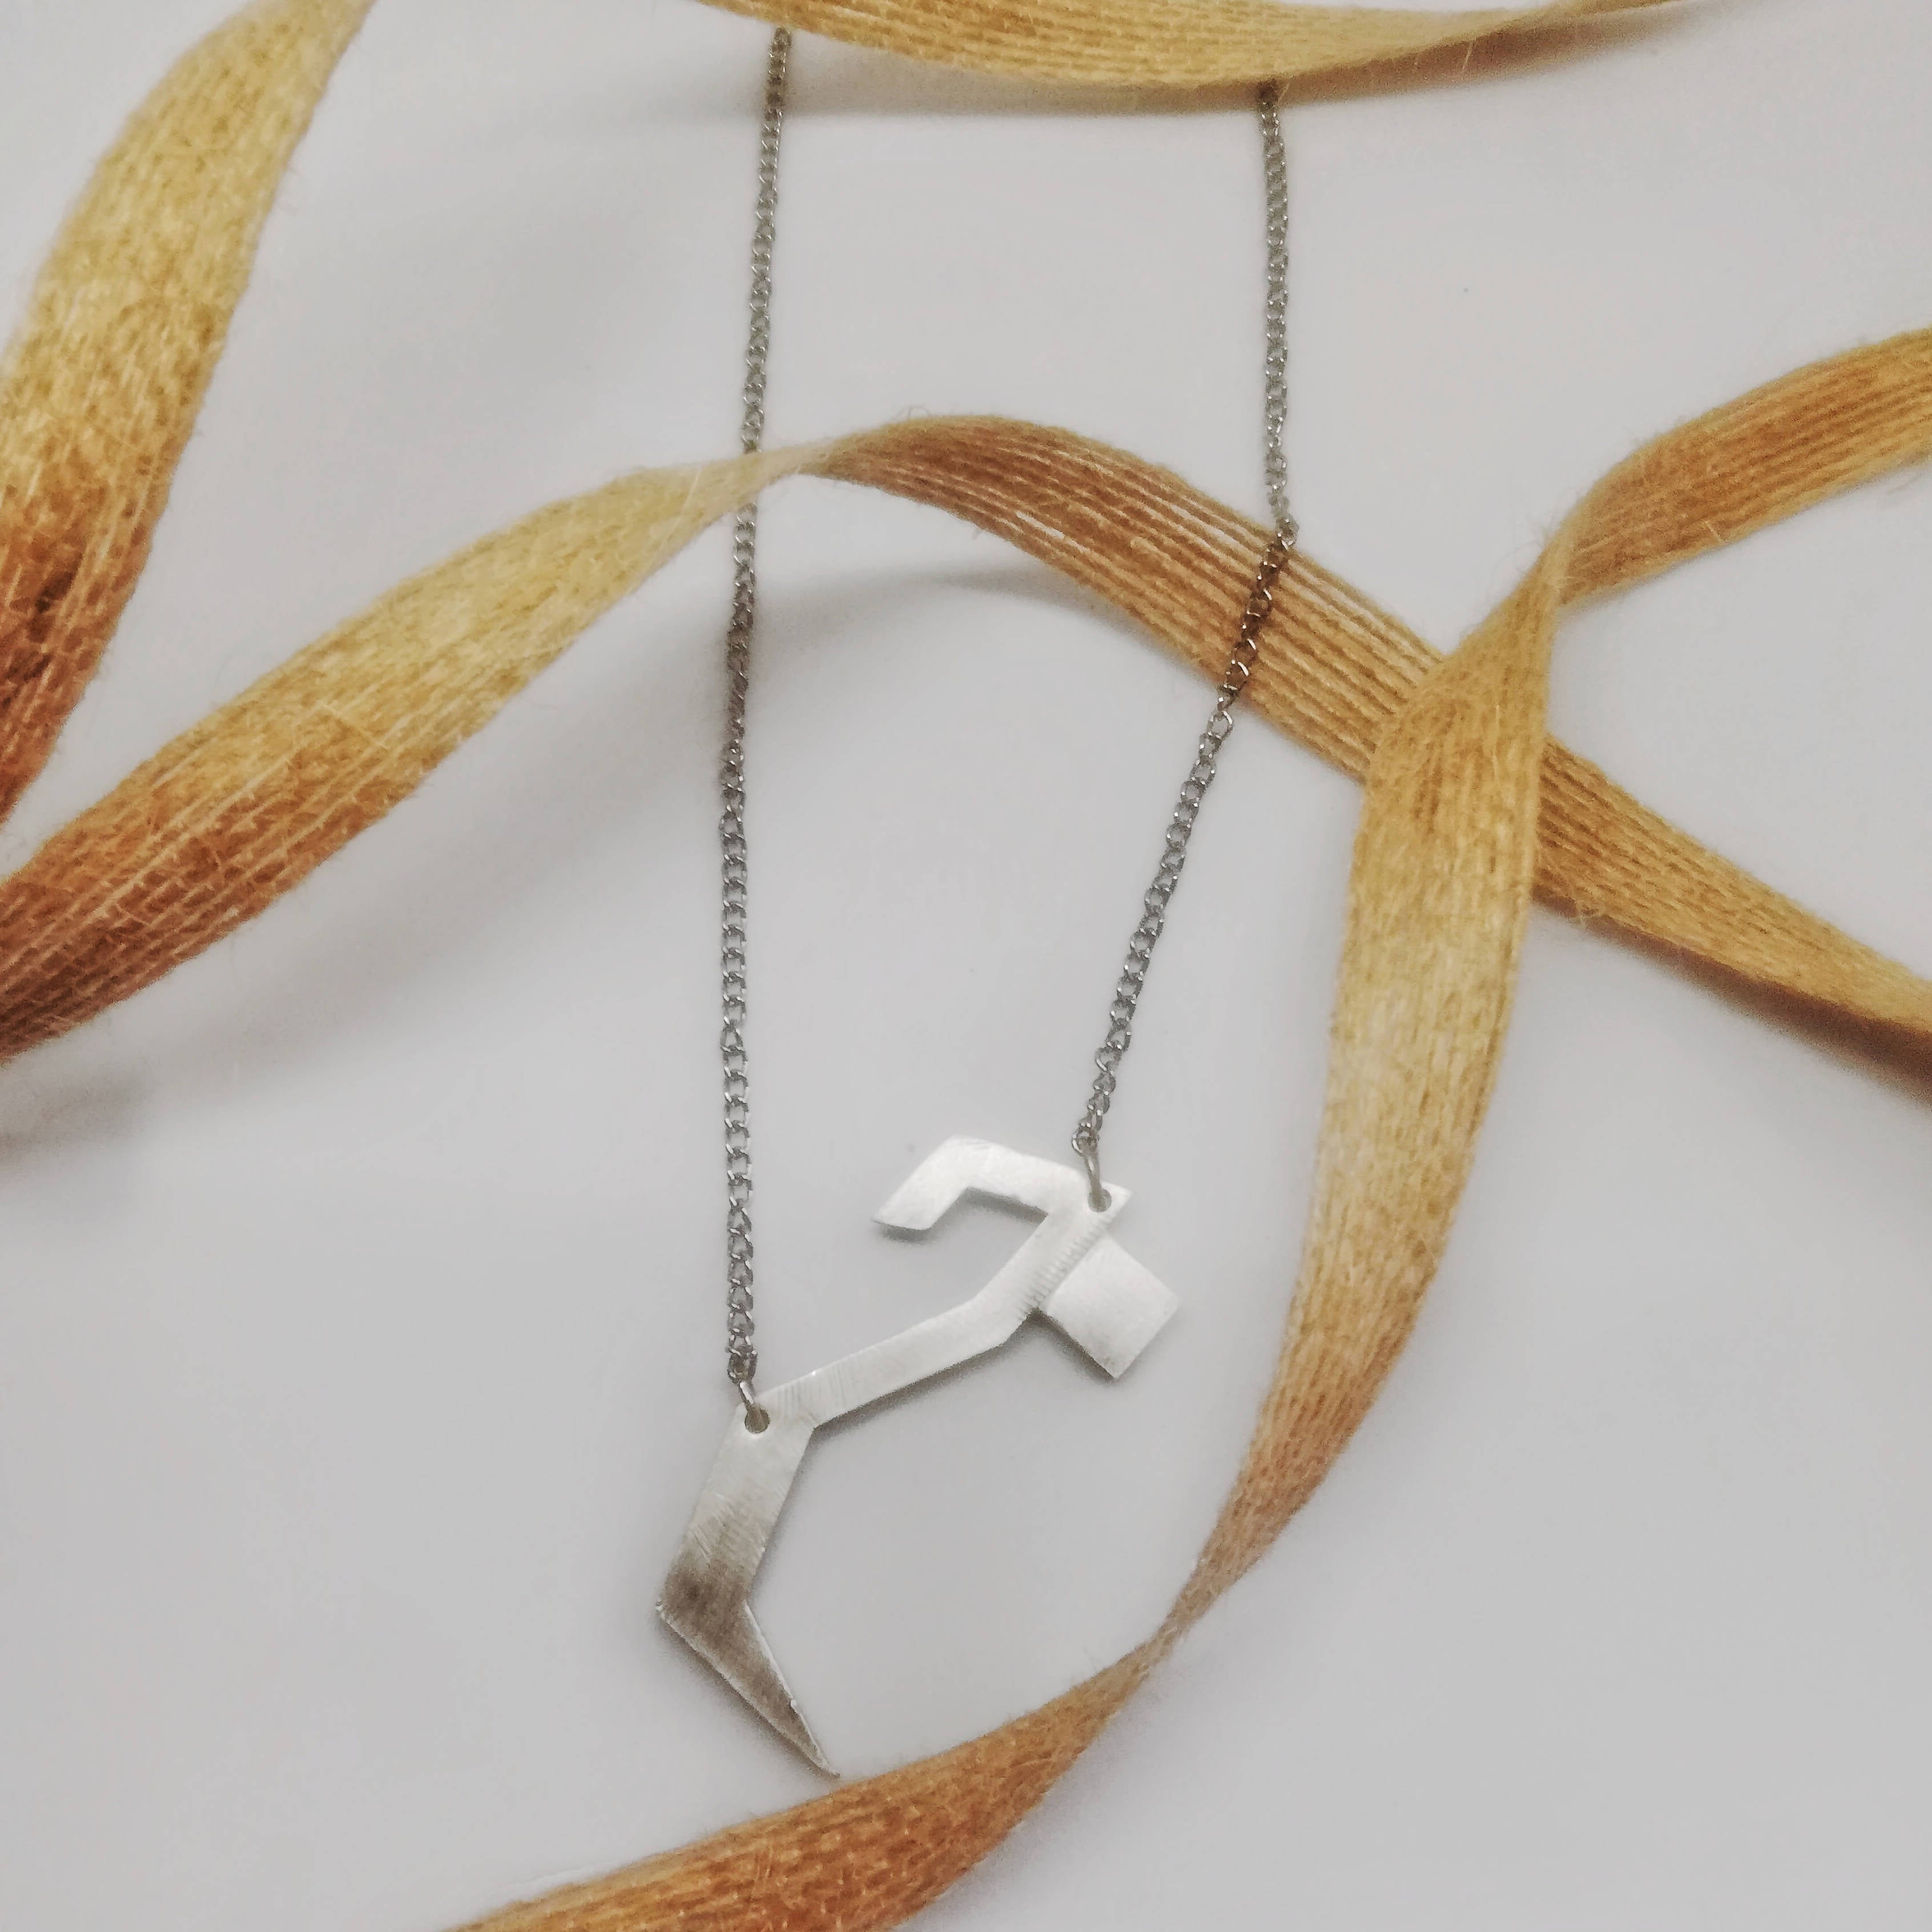 Haref Necklace (Arabic Letter Necklace)